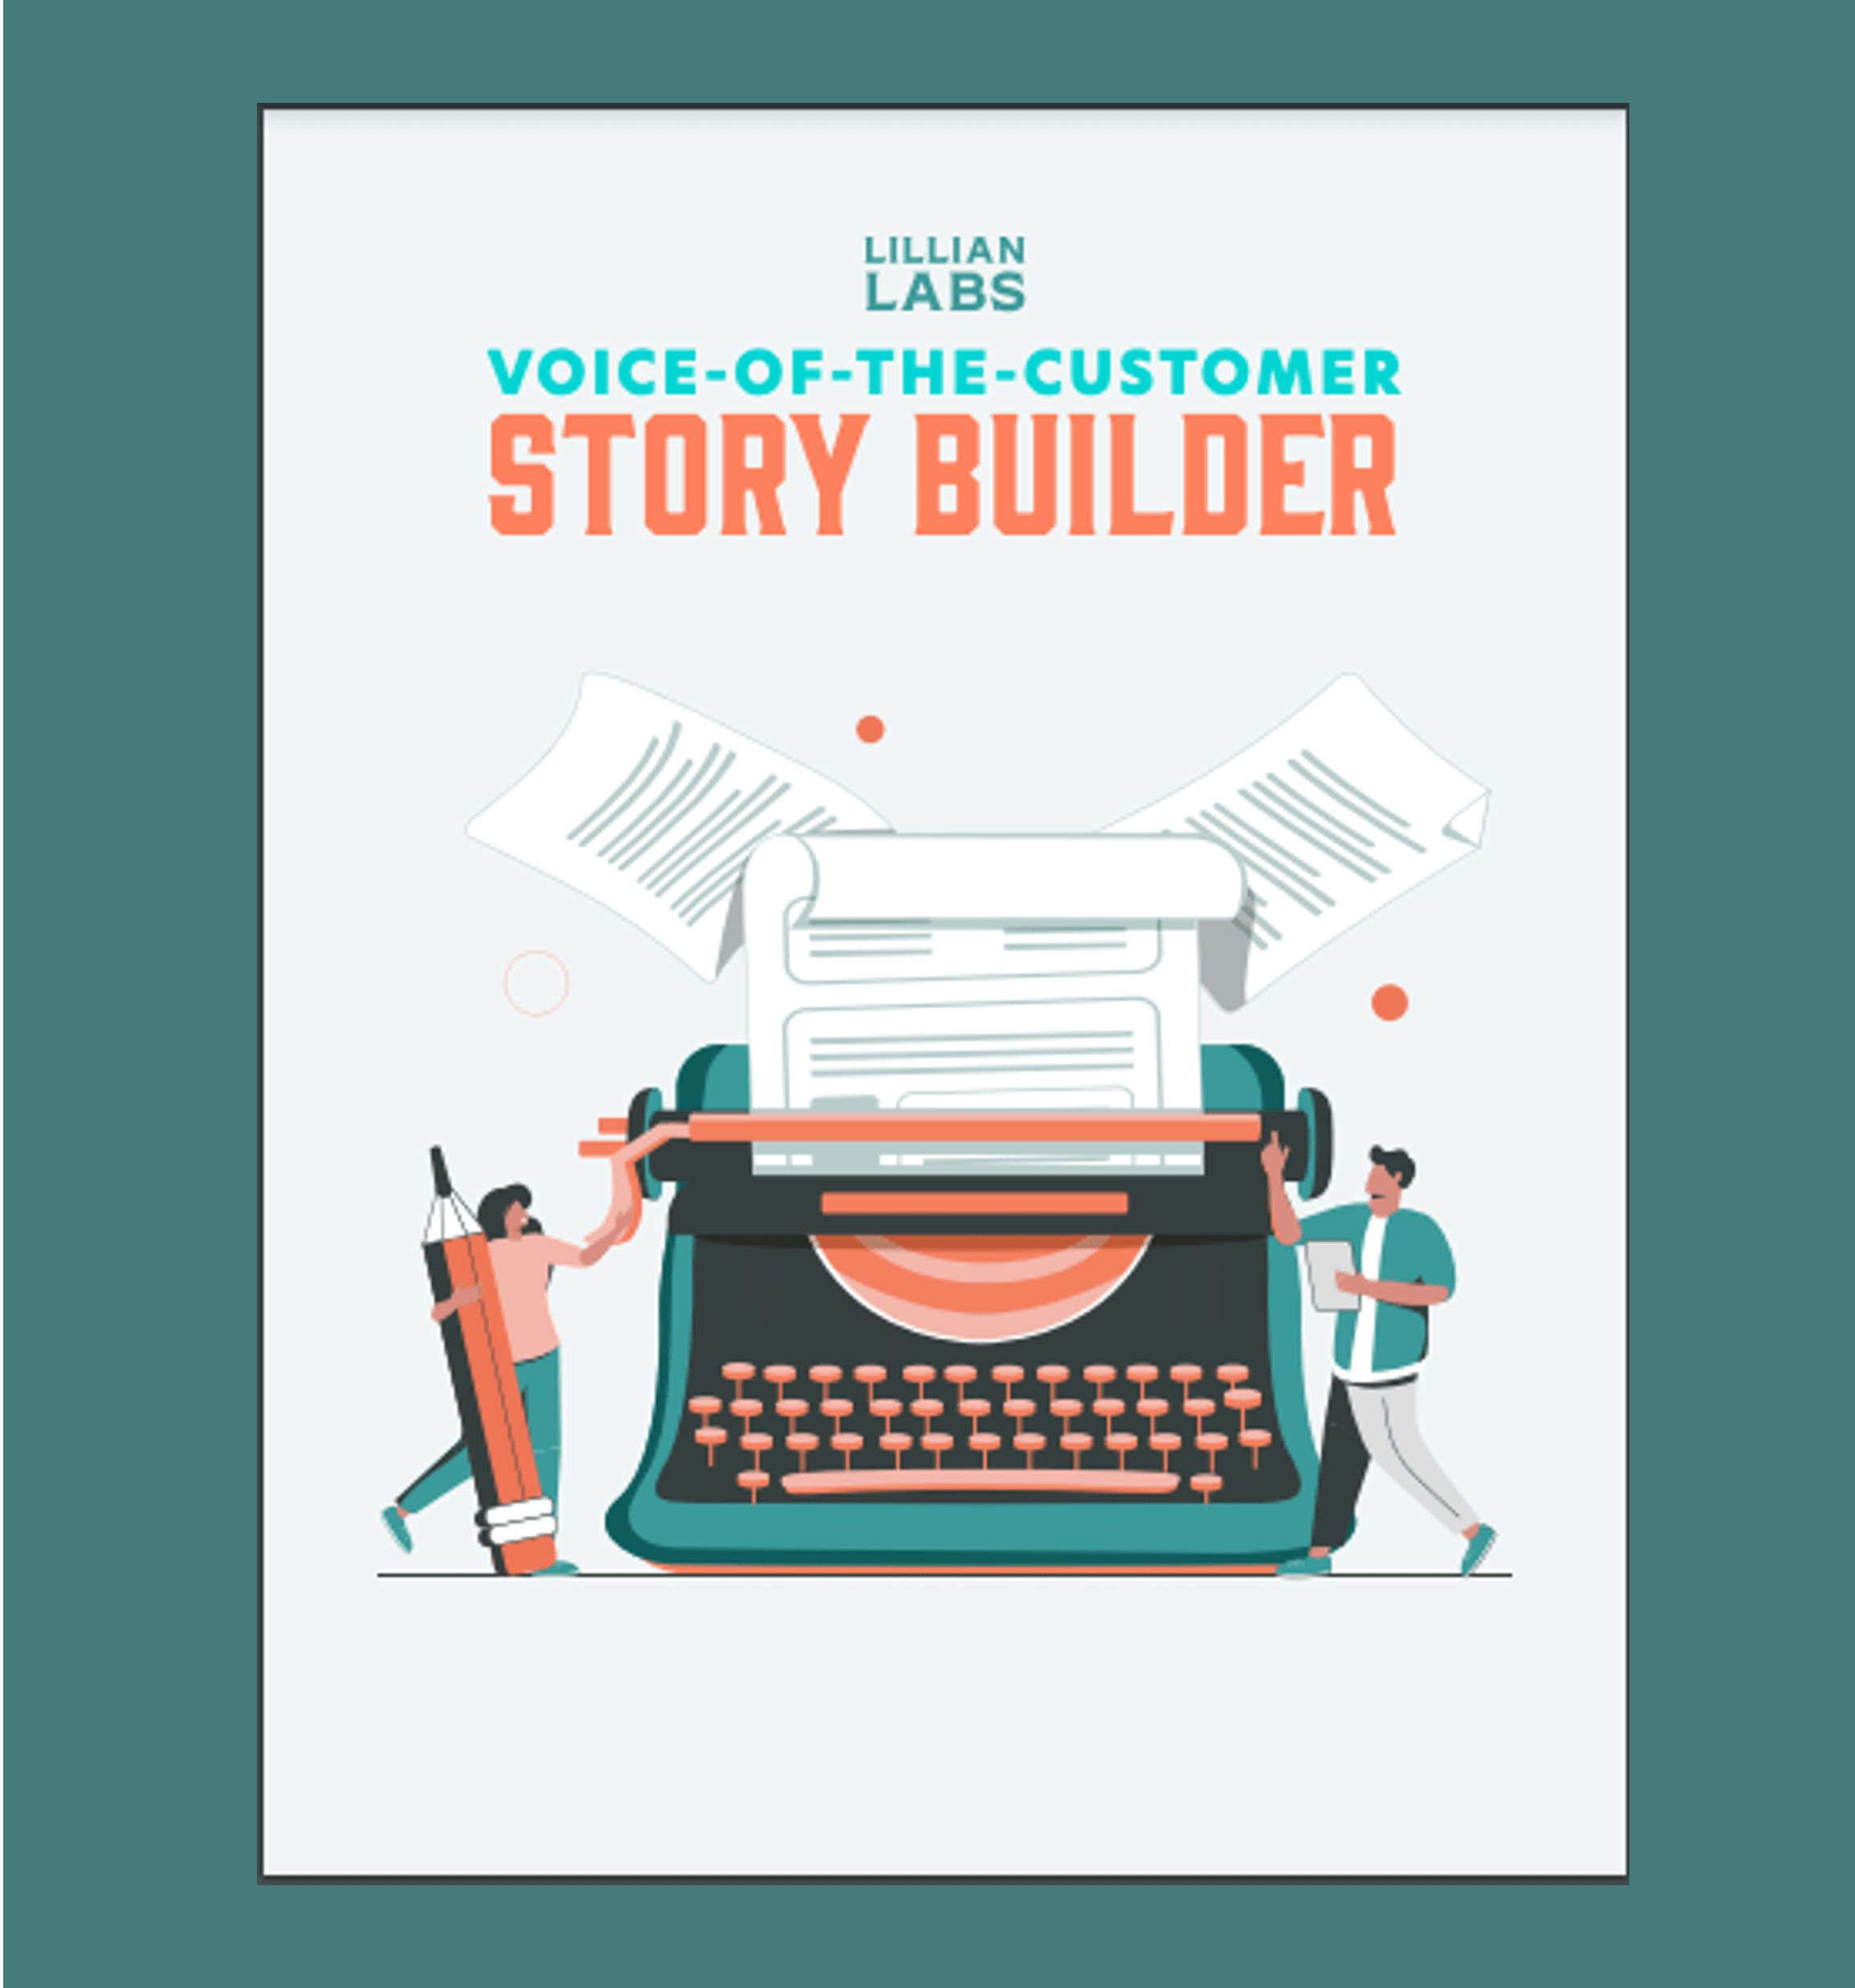 product marketing voice-of-the-customer story builder